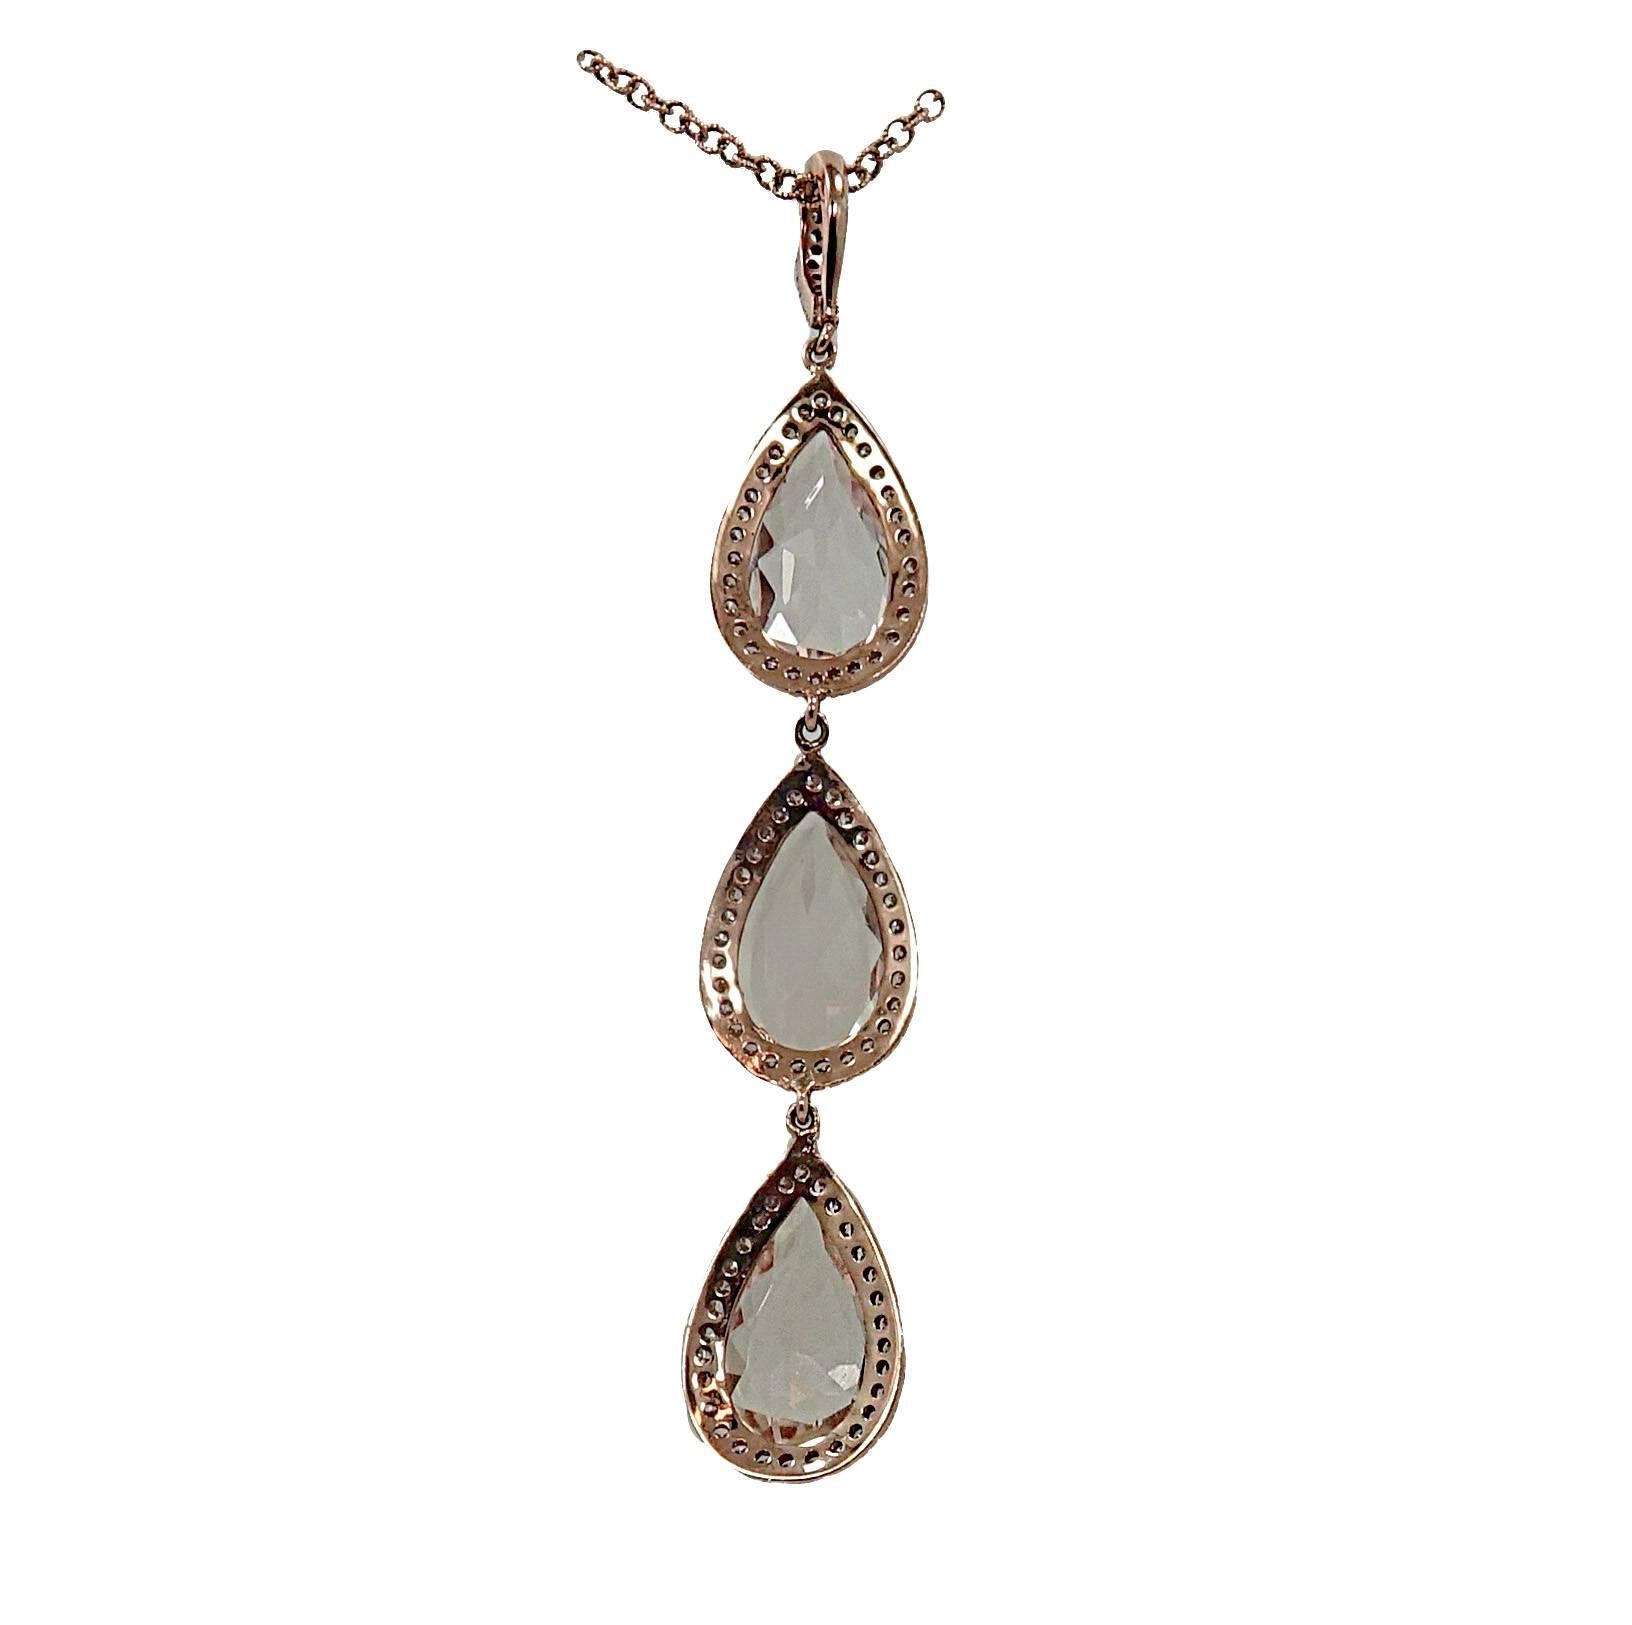 18k Rose Gold Pendant With Morganite Stones Weighing A Total Carat Weight Of 17.98ct and Diamonds Weighing A Total Carat Weight Of 1.21ct. This Pendant is 3 Inches In Length.